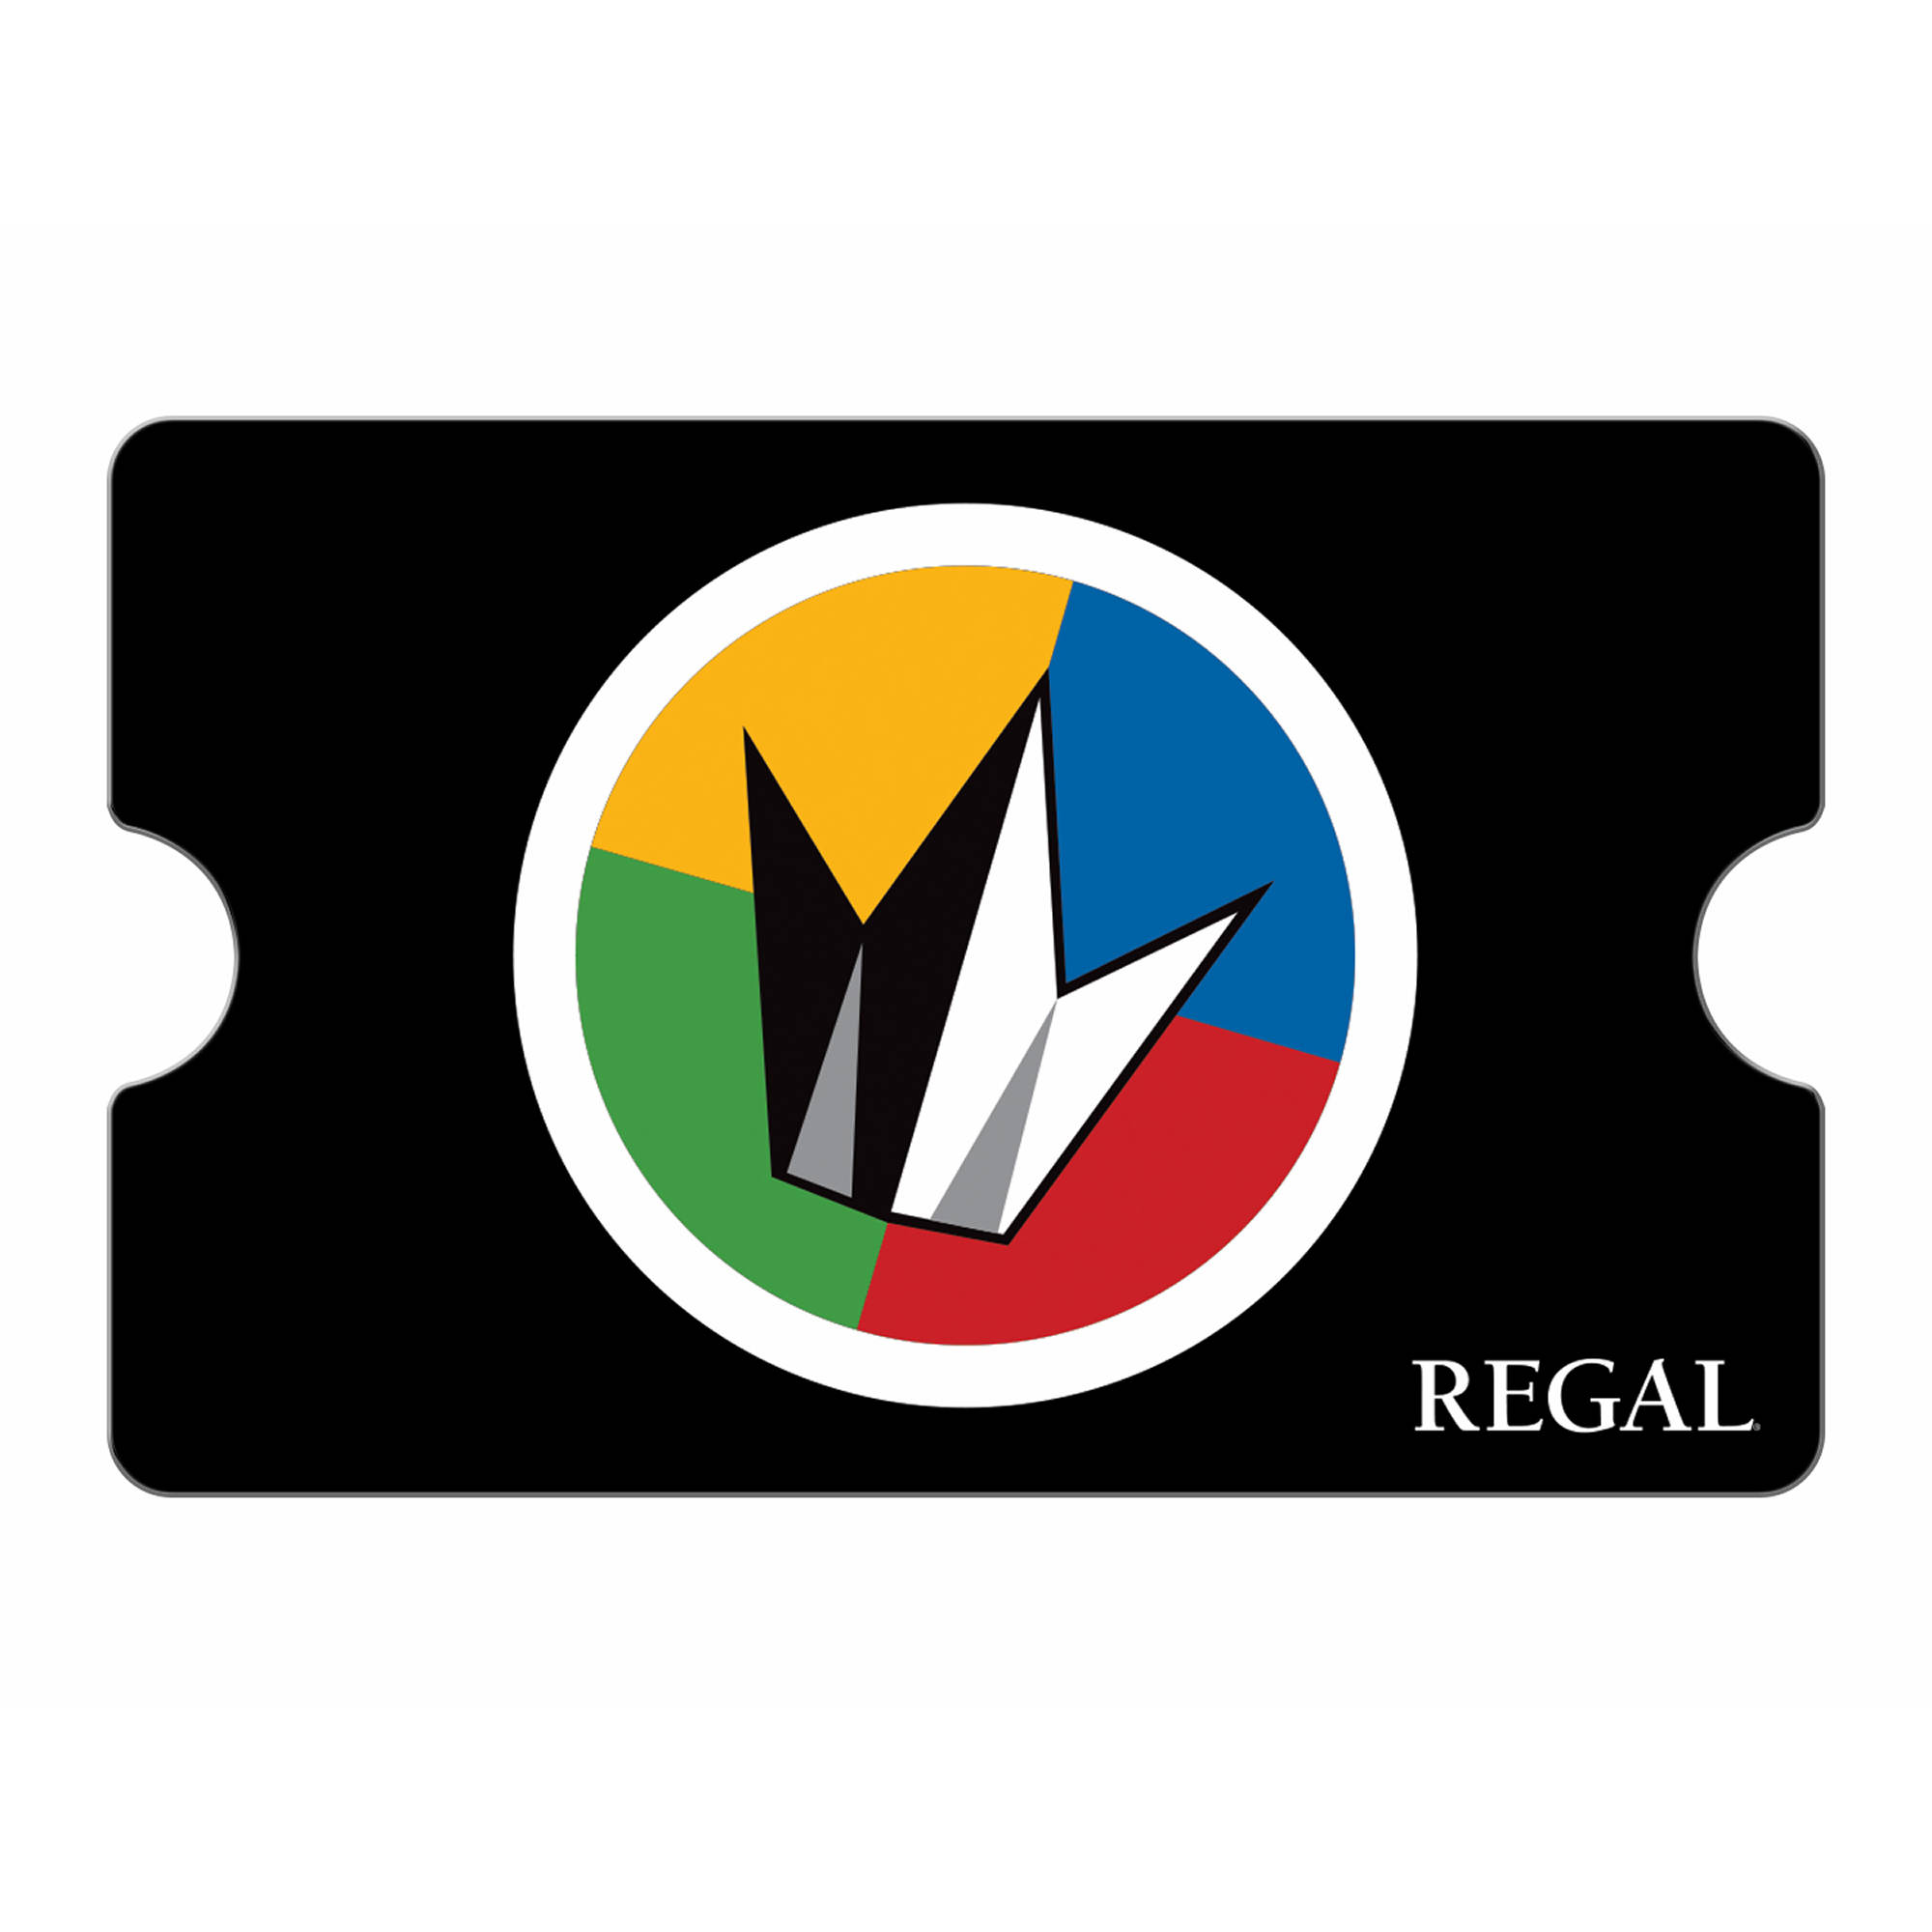 Where can you find locations for Regal Cinemas movie theaters?